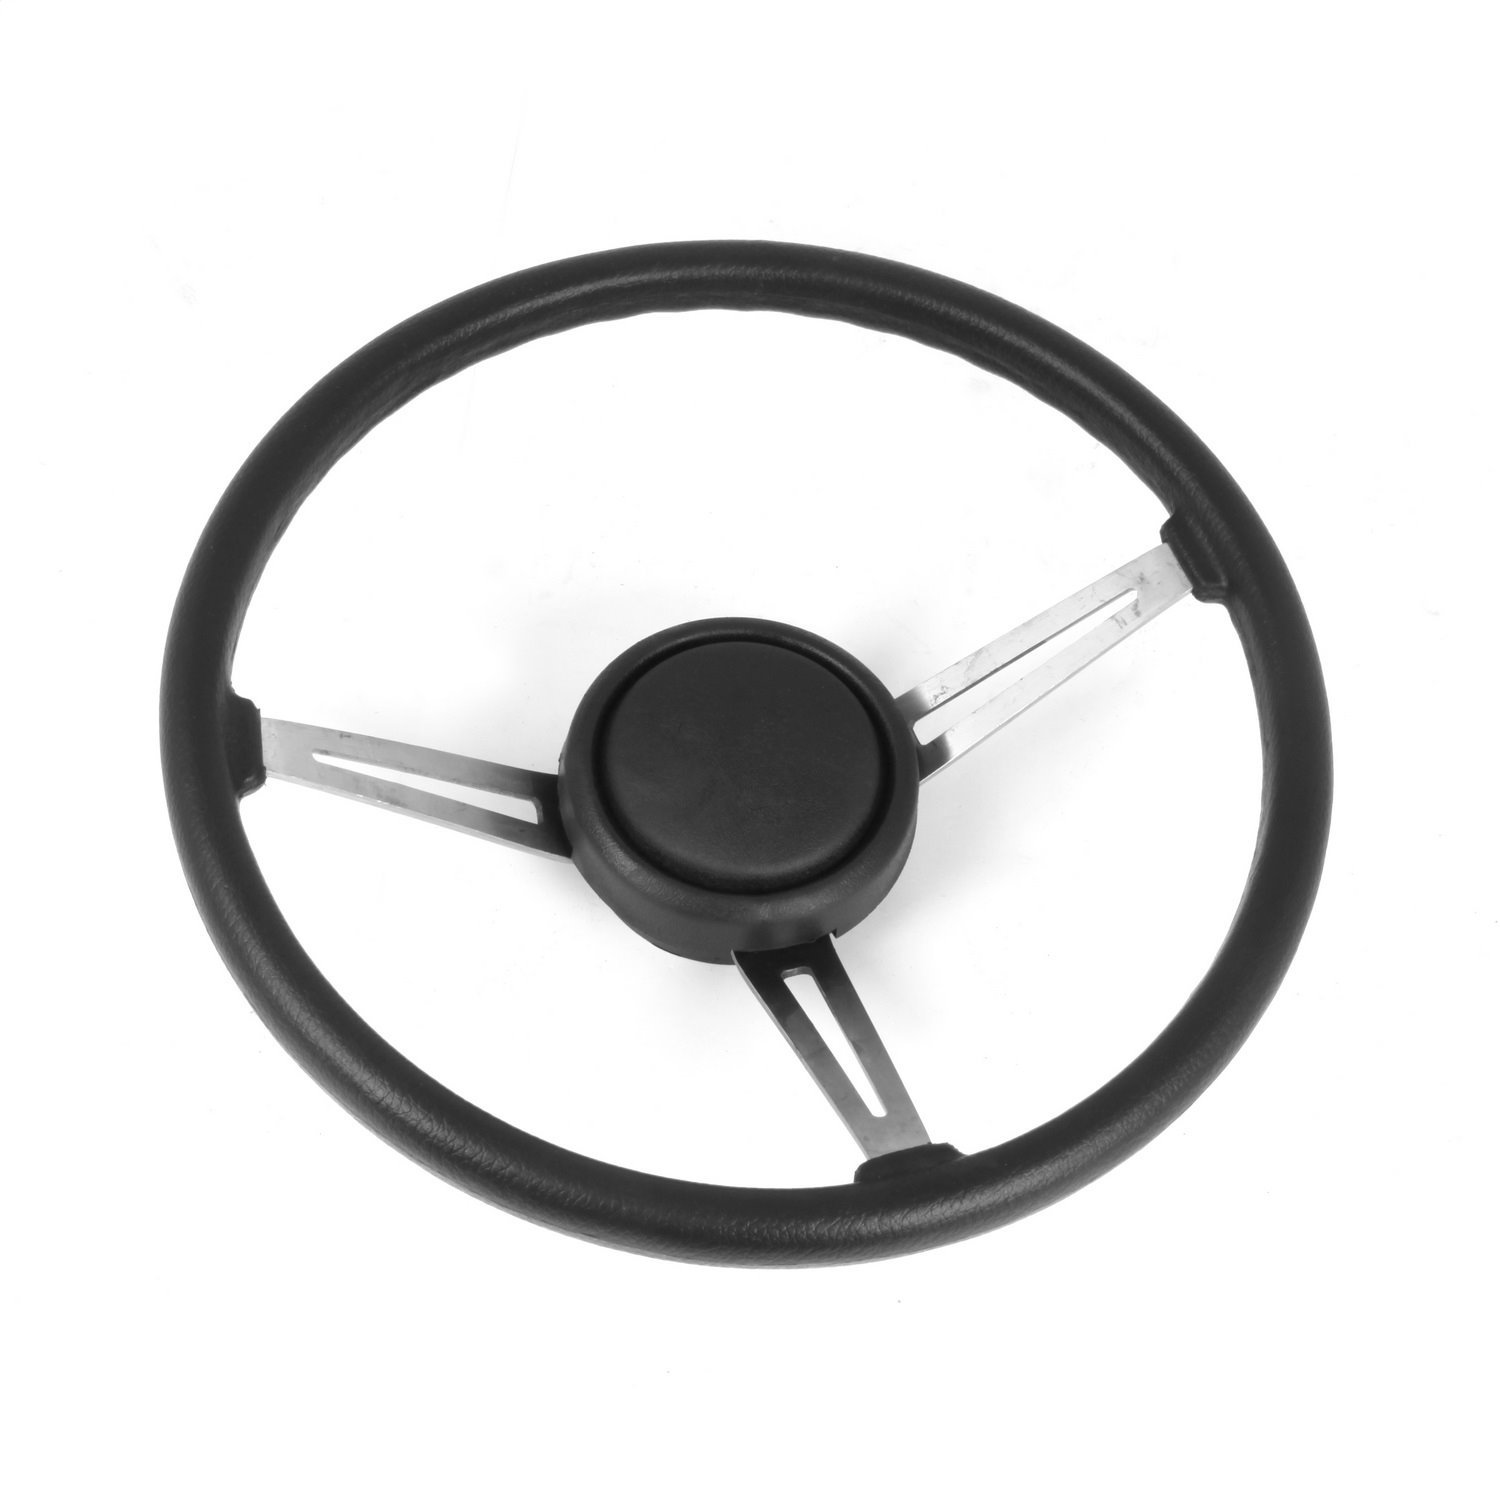 This black leather steering wheel kit from Omix-ADA fits 76-95 Jeep CJs & Wranglers. Includes the st